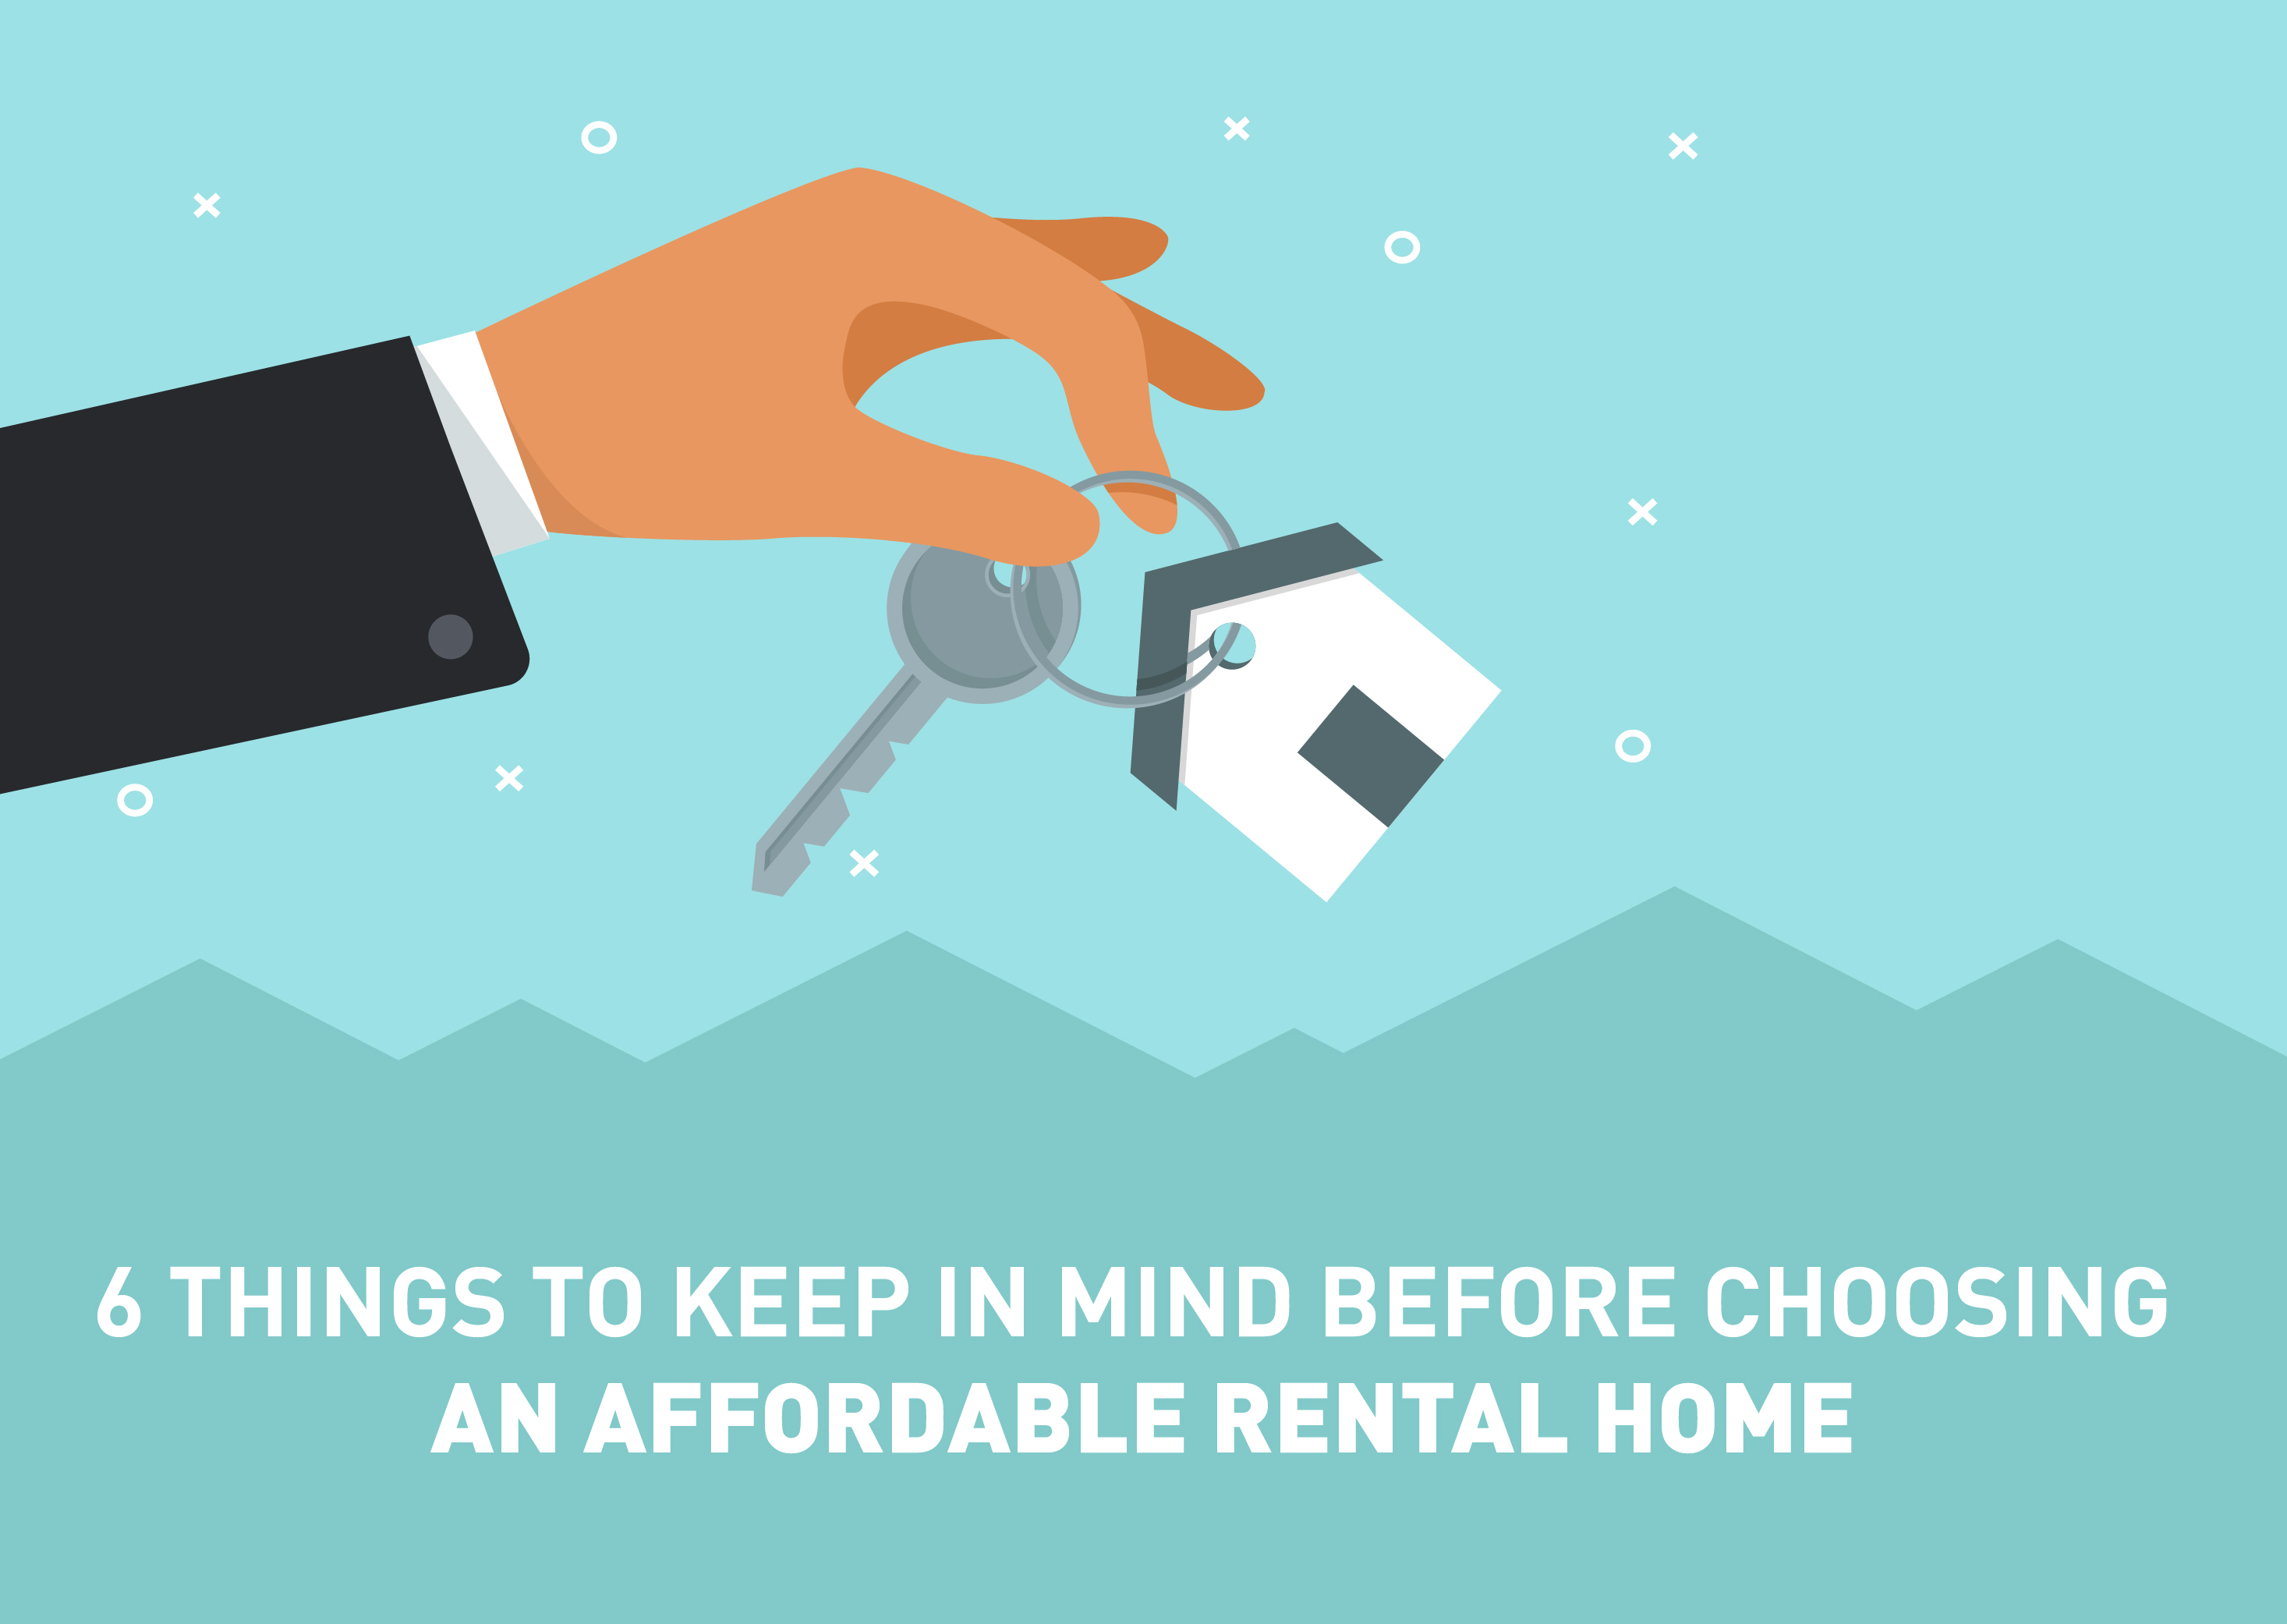 6 Things To Keep In Mind Before Choosing An Affordable Rental Home